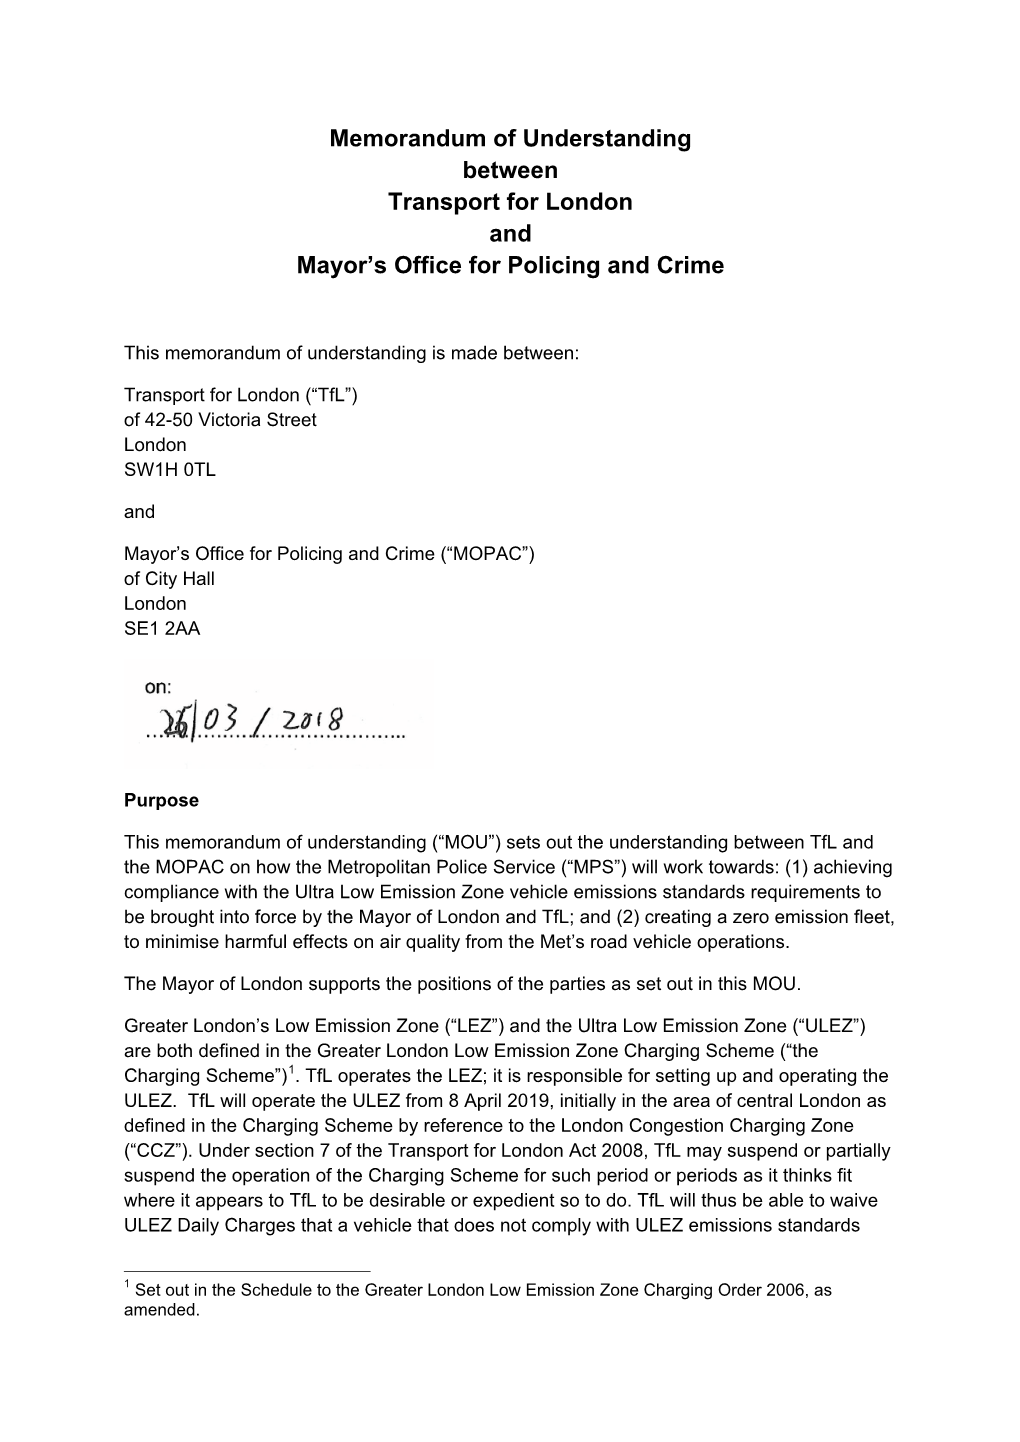 Memorandum of Understanding Between Transport for London and Mayor's Office for Policing and Crime